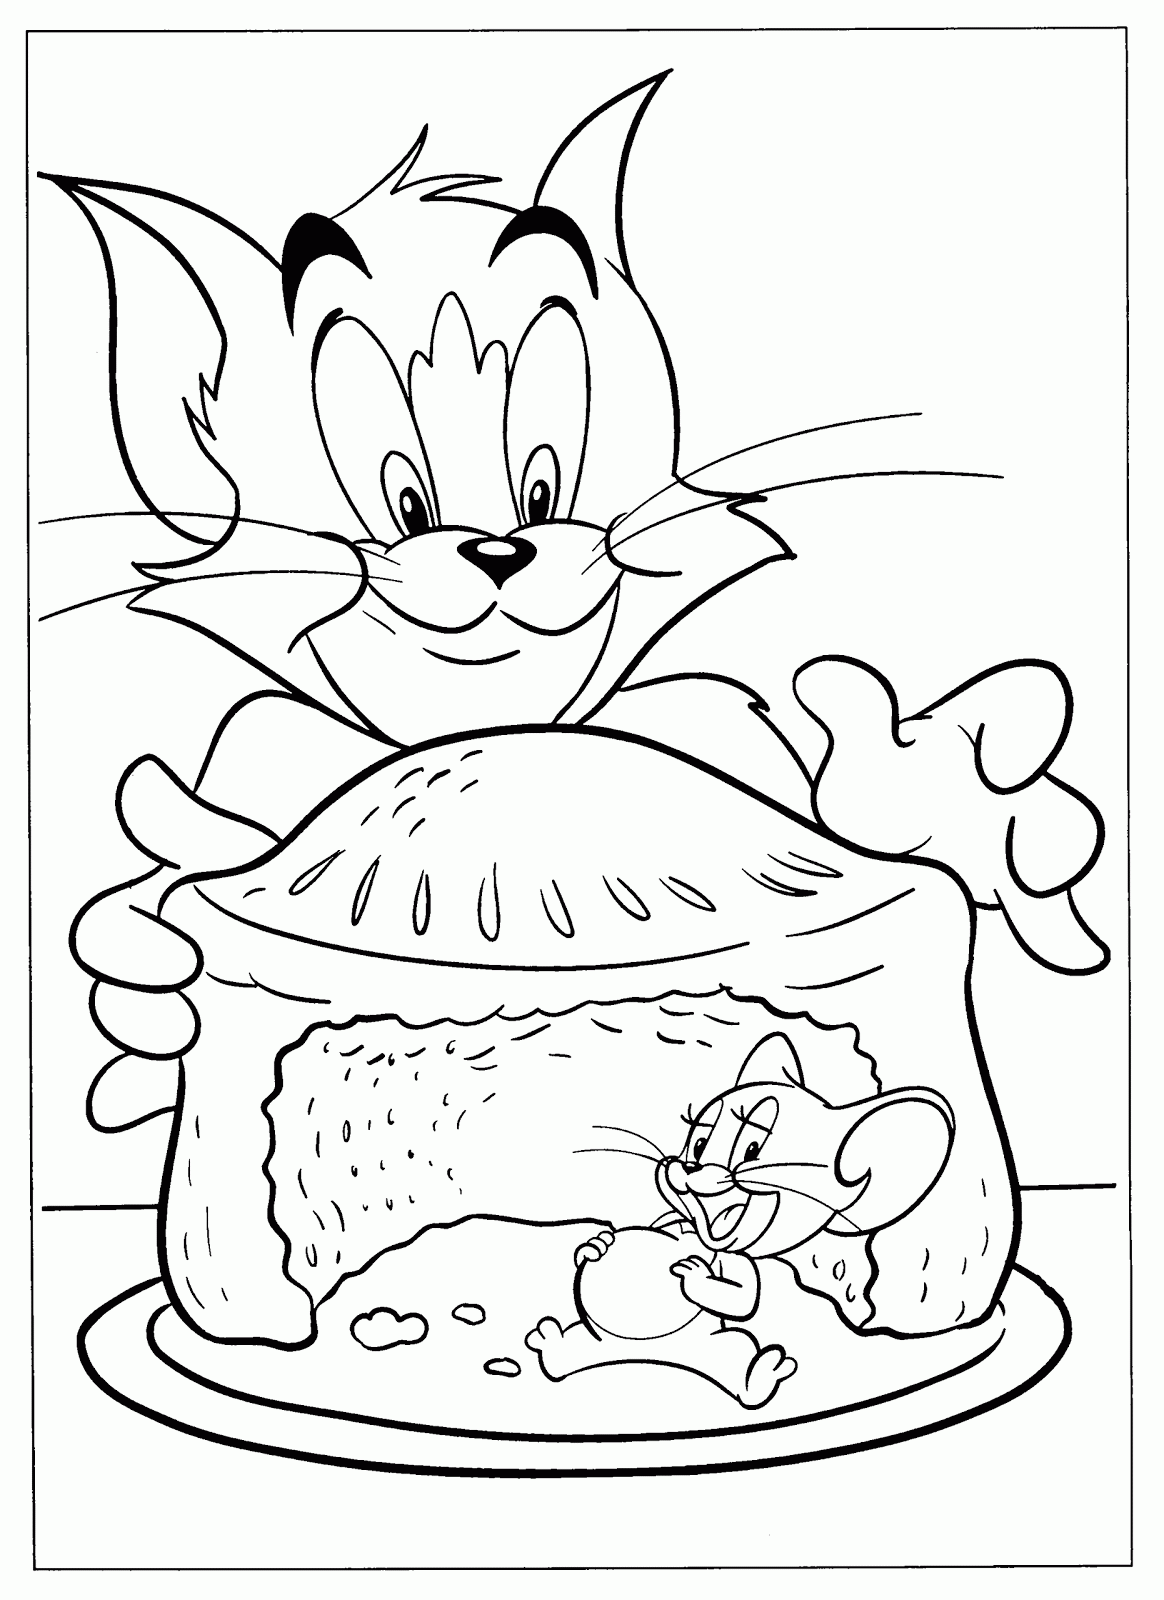 tom and jerry coloring page free printable tom and jerry coloring pages for kids and page tom coloring jerry 